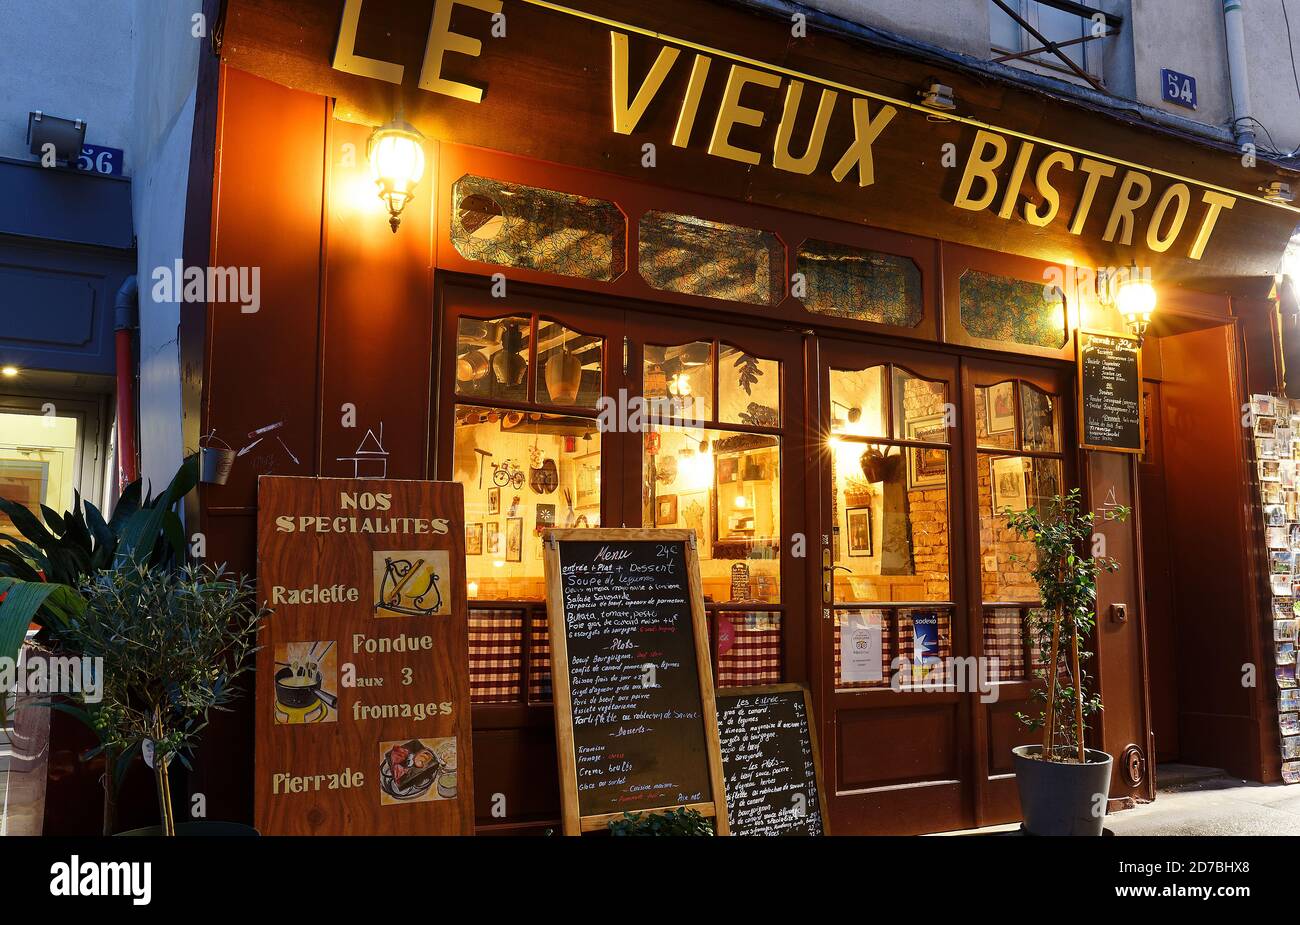 Le vieux bistro is lovely little restaurant located on Rue Mouffetard in Paris, France. Stock Photo